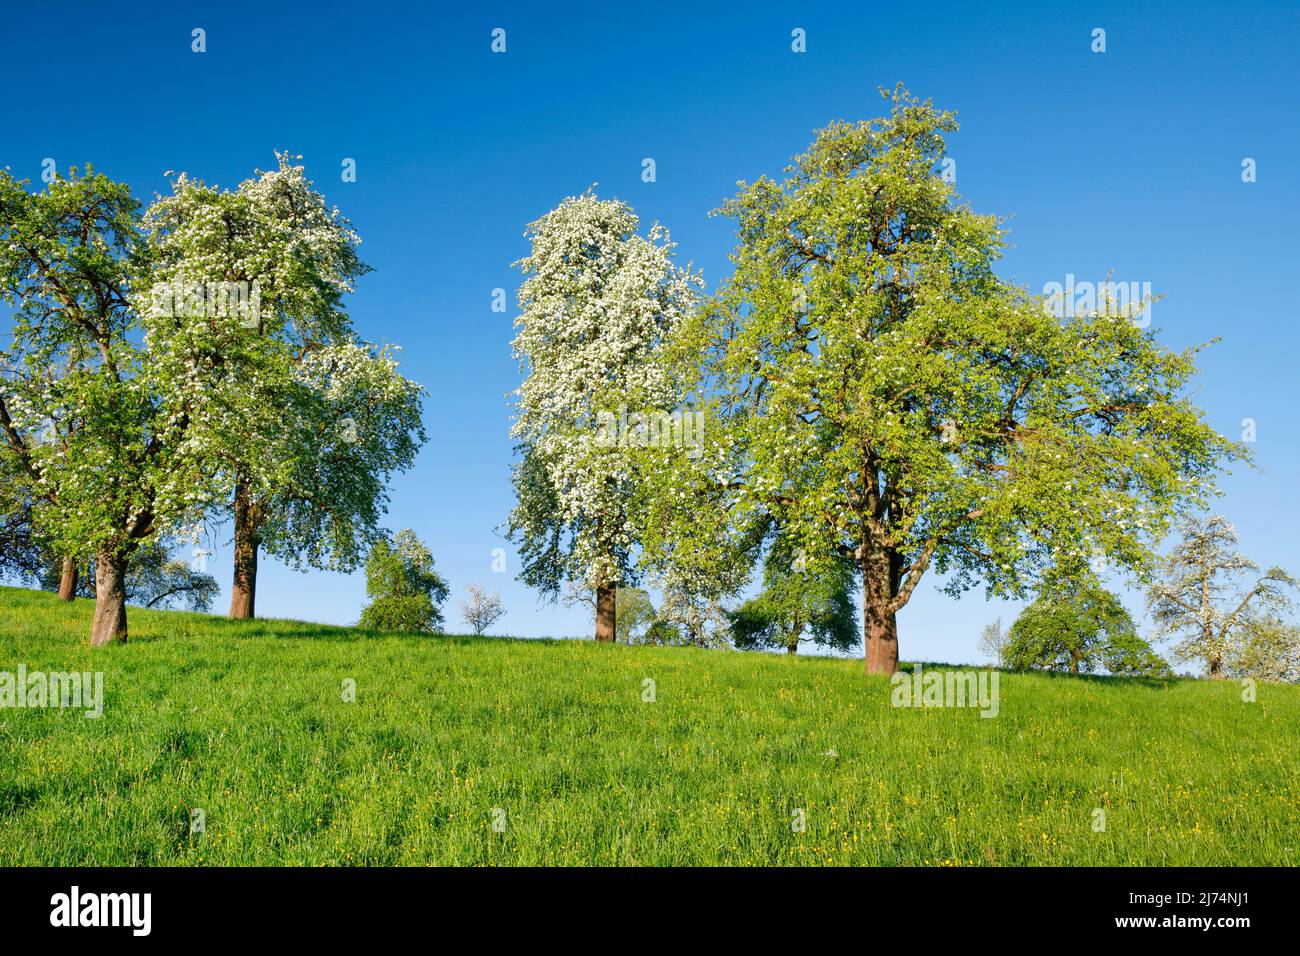 Common pear (Pyrus communis), Blooming pear trees in a green meadow, Oetwil am See, Switzerland, Zuercher Oberland, Hombrechtikon Stock Photo